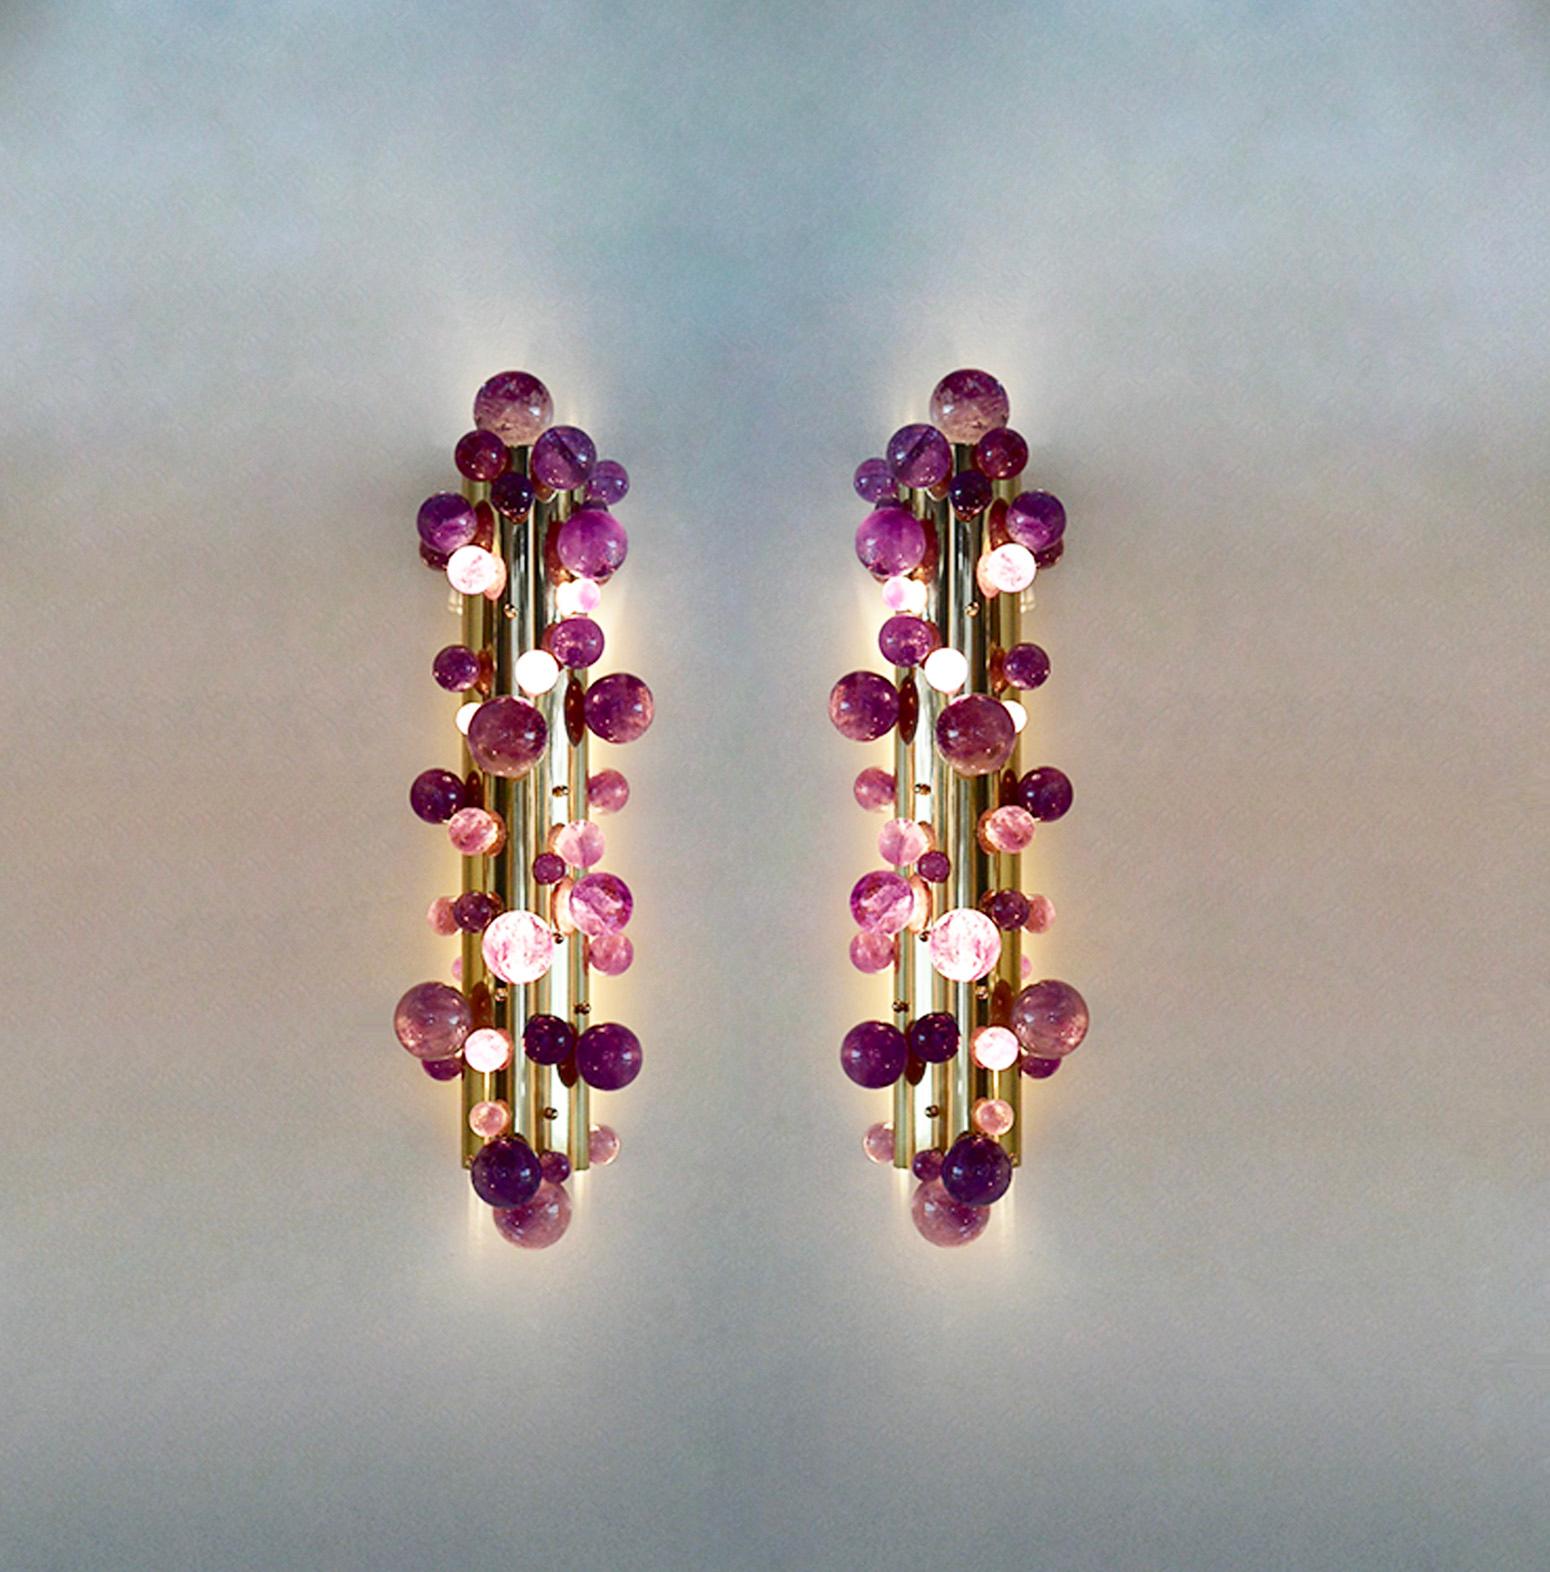 Contemporary Group Of Four Amethyst Bubble Sconces by Phoenix